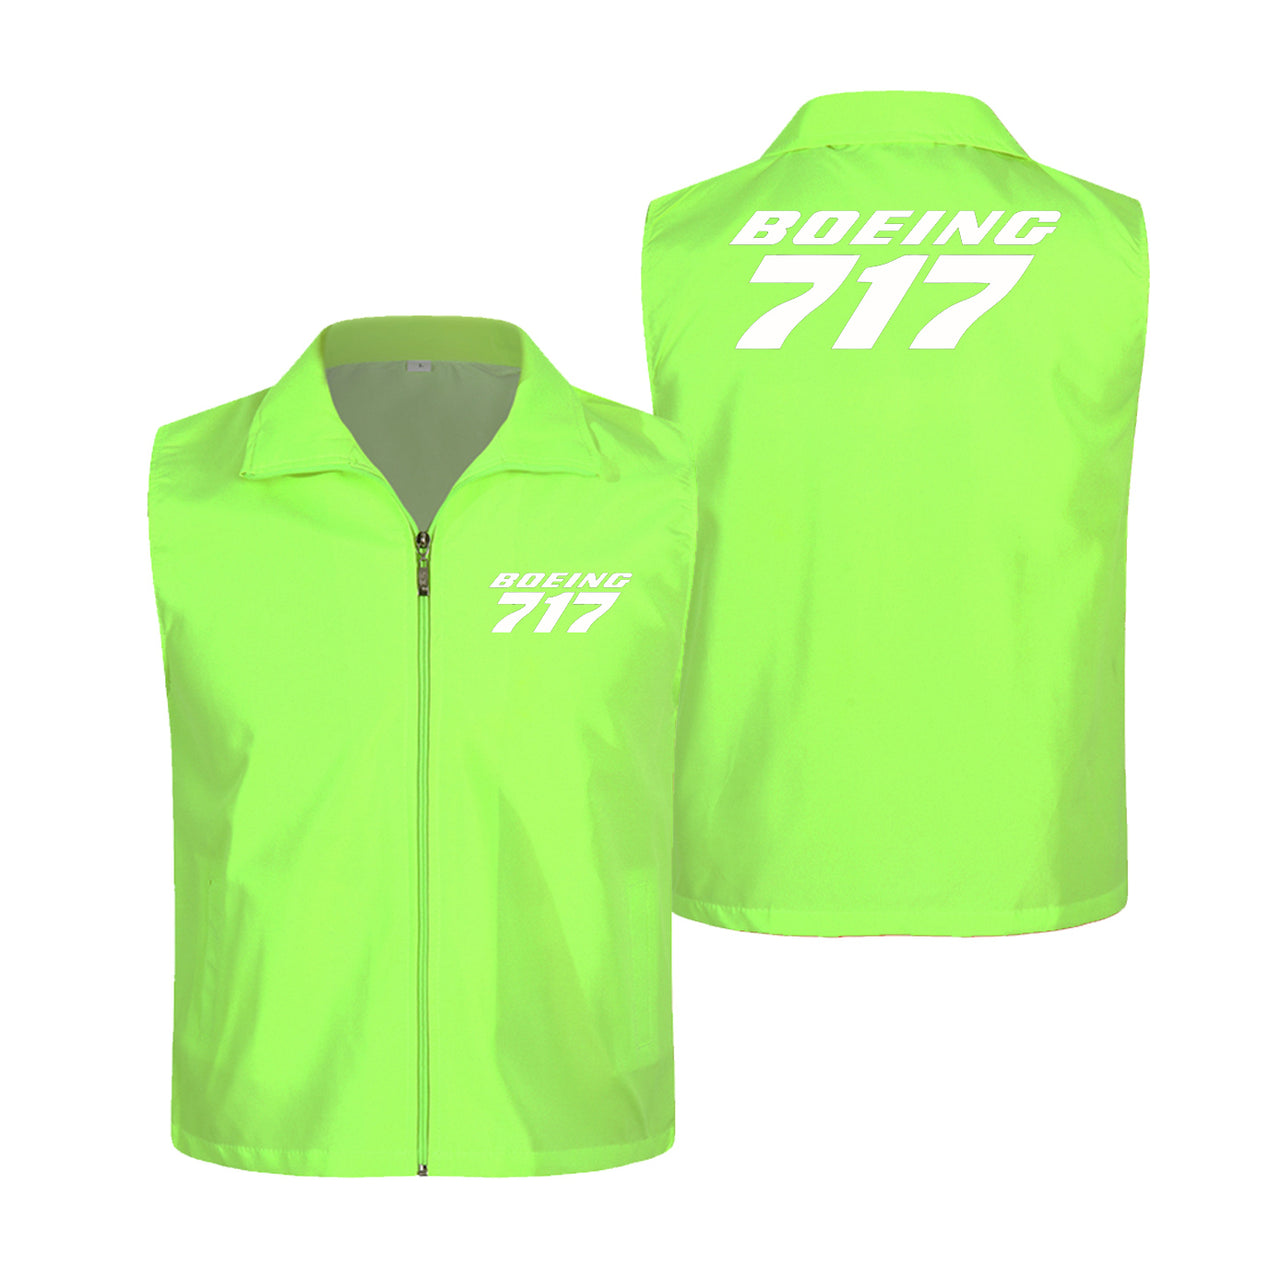 Boeing 717 & Text Designed Thin Style Vests